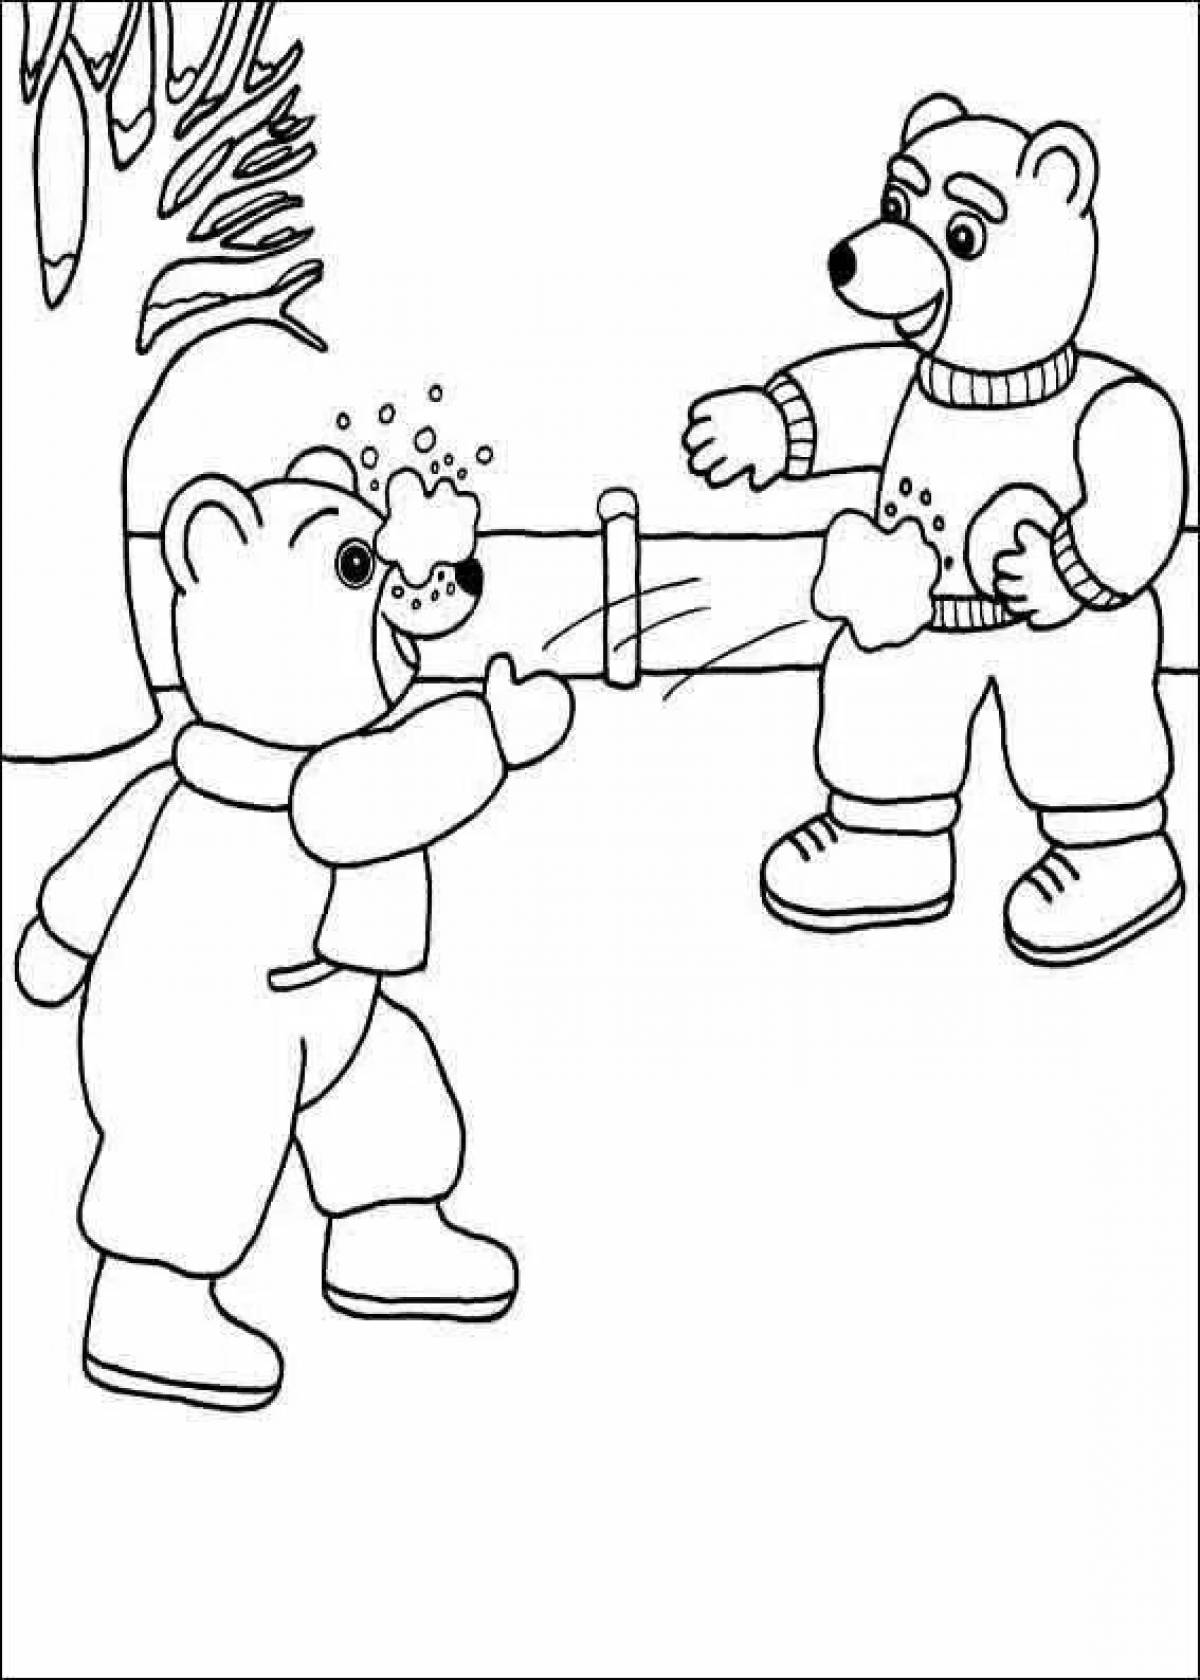 Two greedy teddy bears live coloring